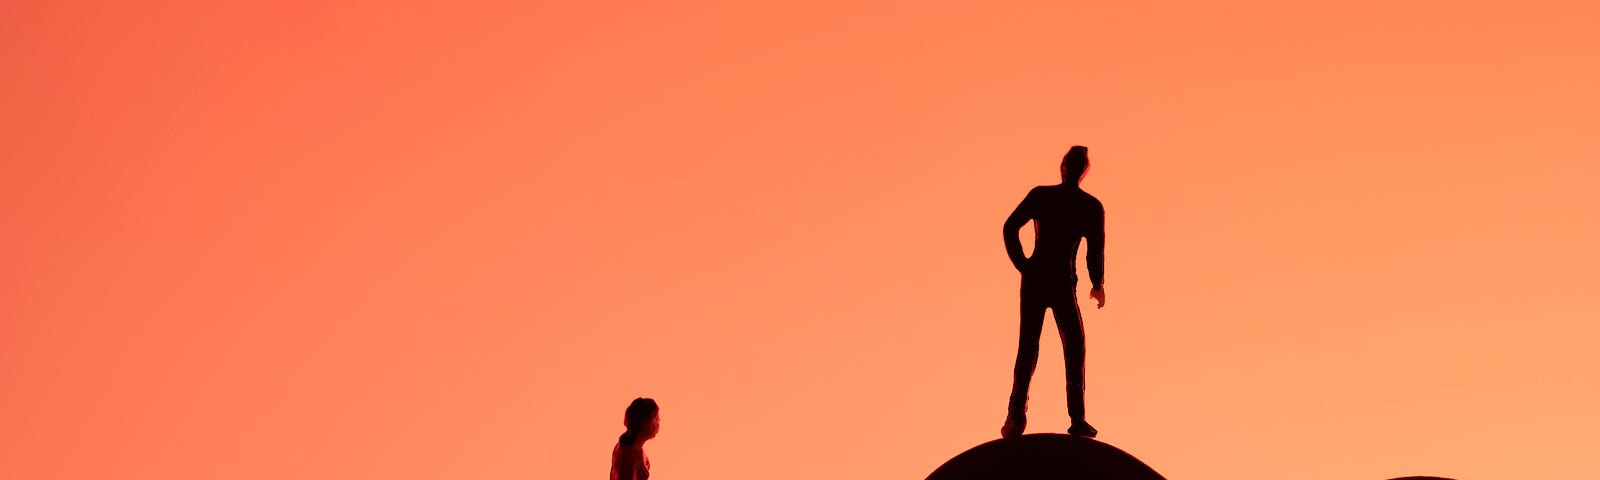 Silhouettes: A person sits on a large heart are the bottom lefthand corner of the photo; another person stands on another large heart in the bottom righthand corner. The black silhouettes are set off by a pinkish/salmon background.